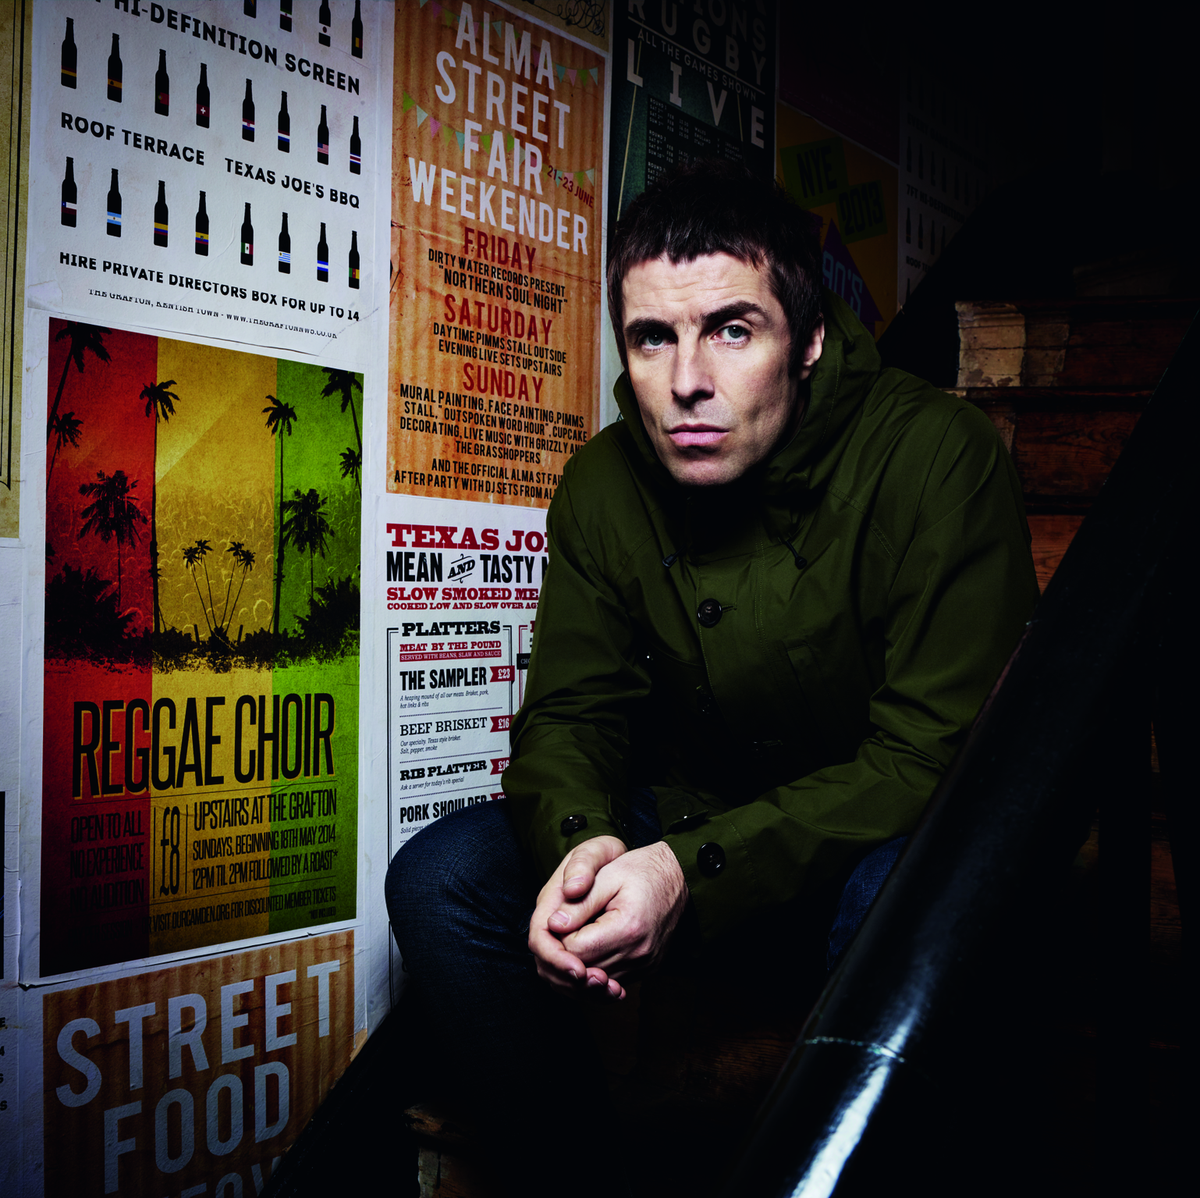 Liam Gallagher vs. Noel Gallagher: Inside Oasis Beef History